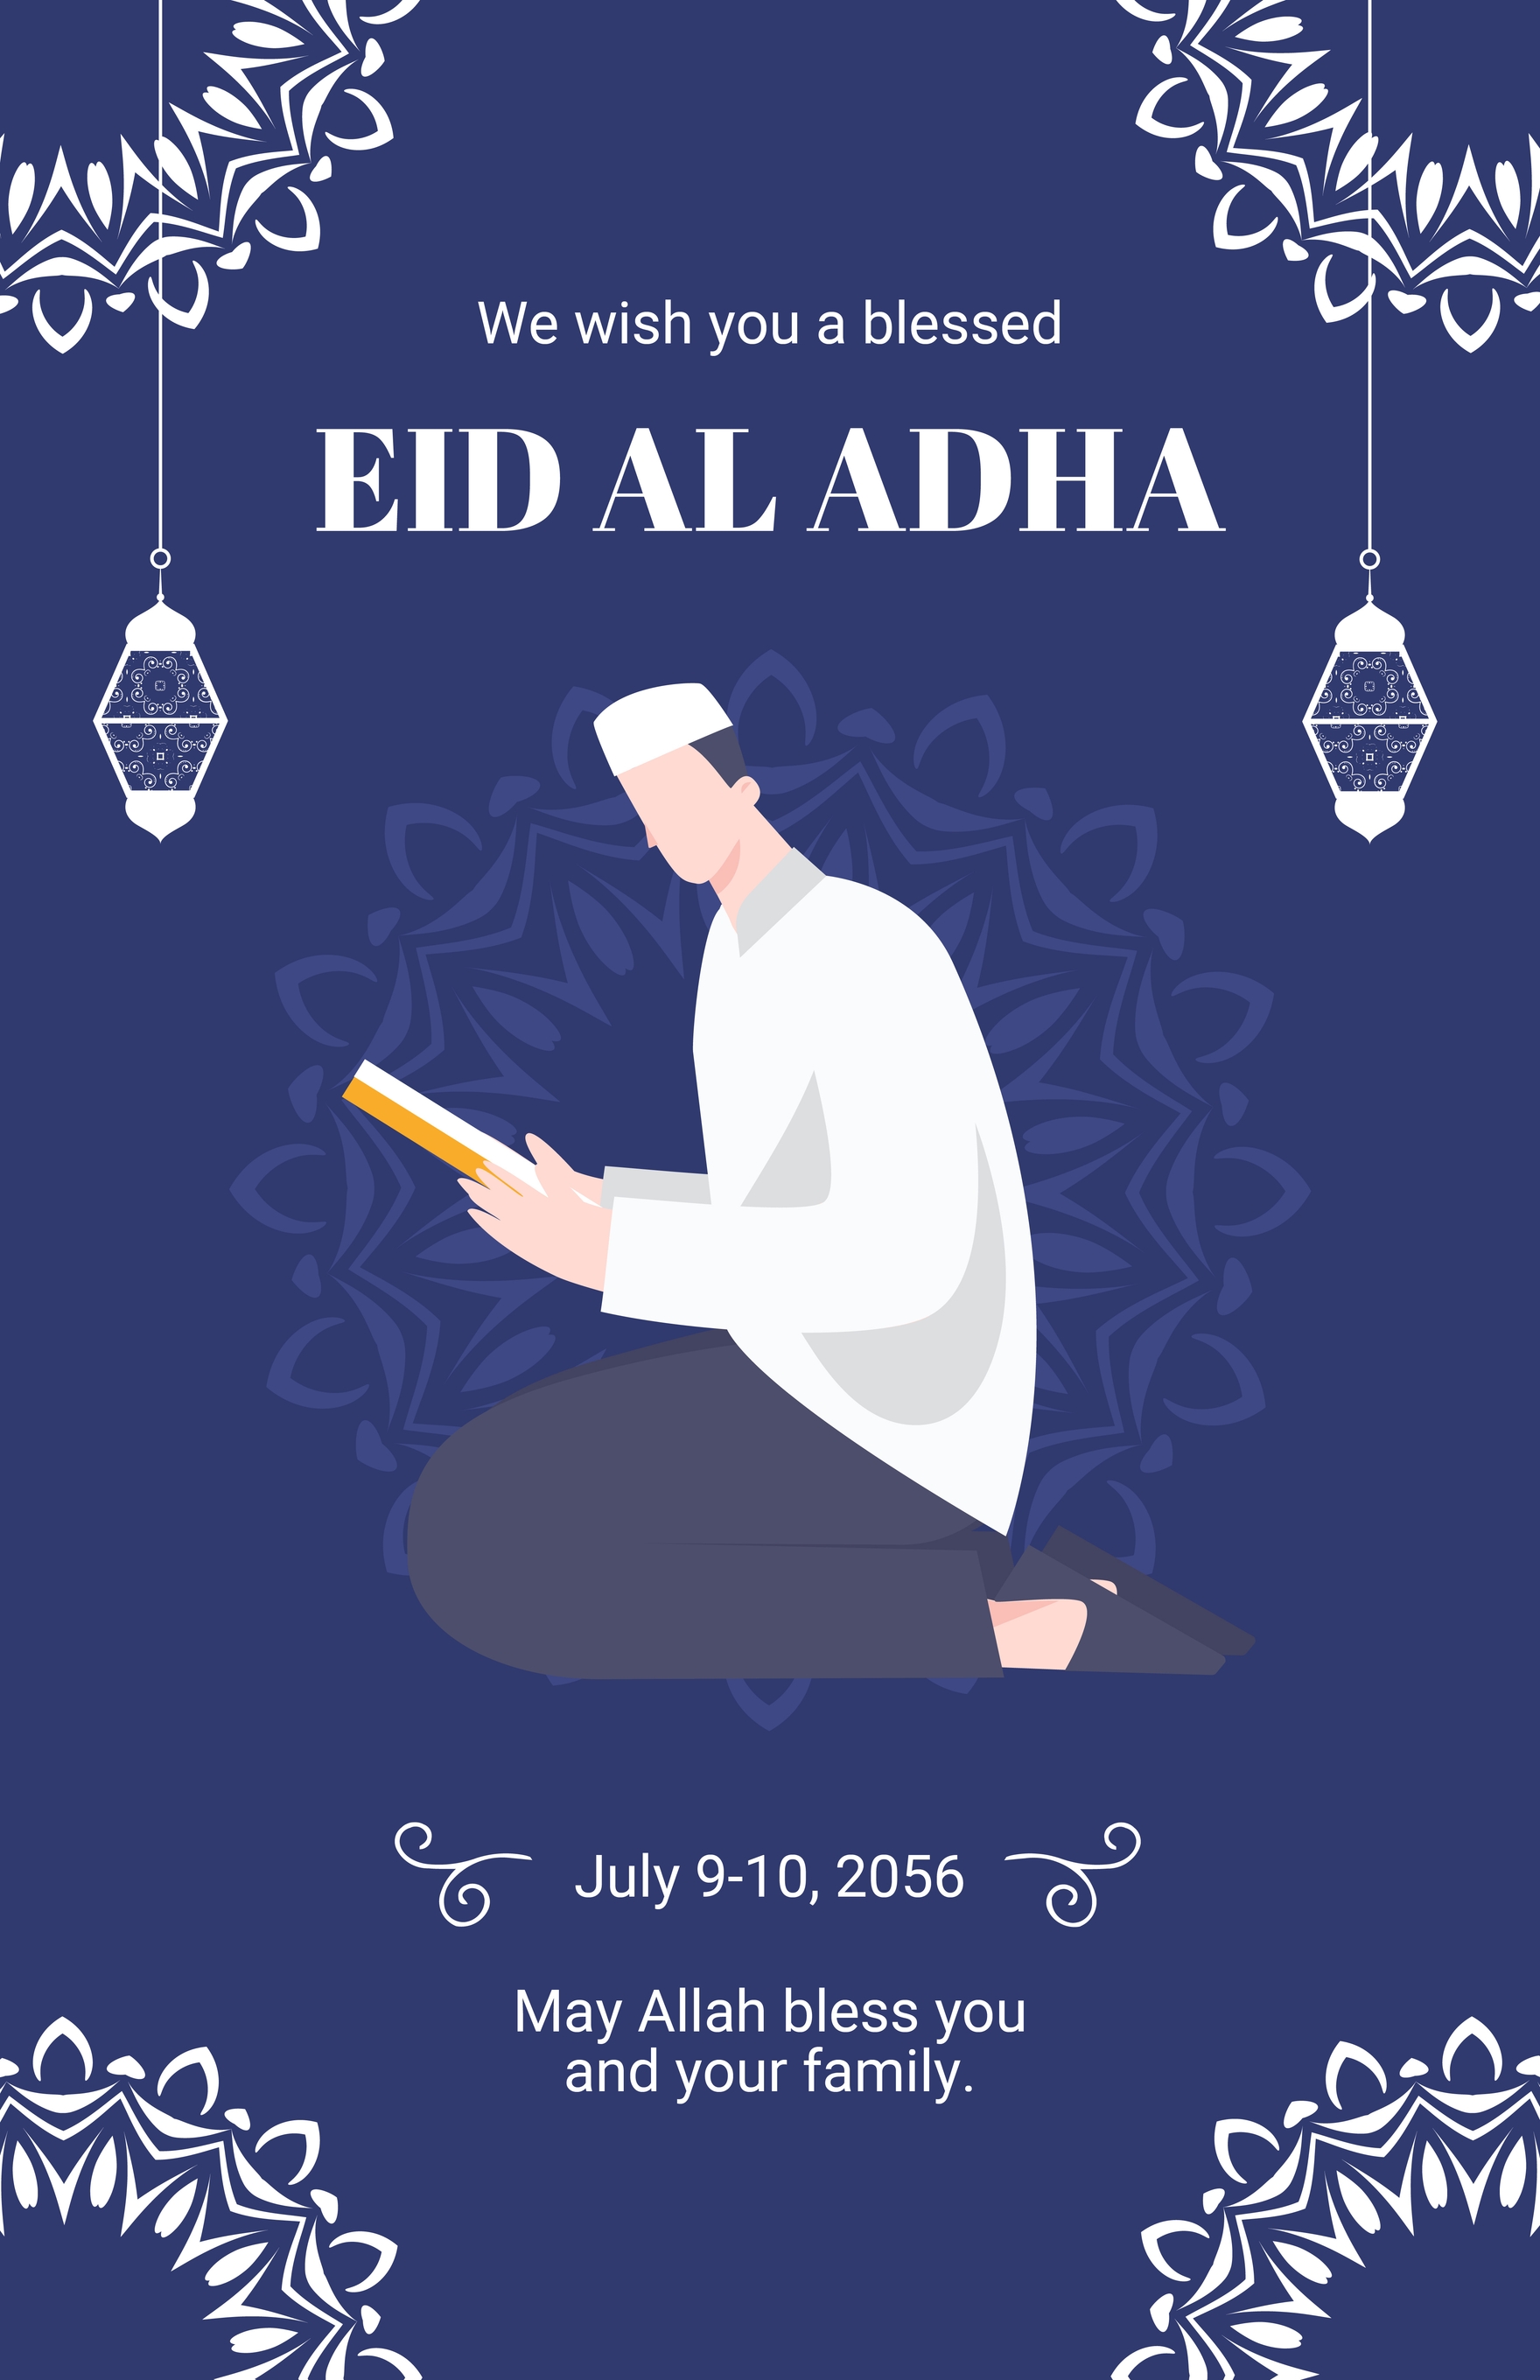 Free Eid Al Adha Wishes Poster in Word, Google Docs, Illustrator, PSD, Apple Pages, Publisher